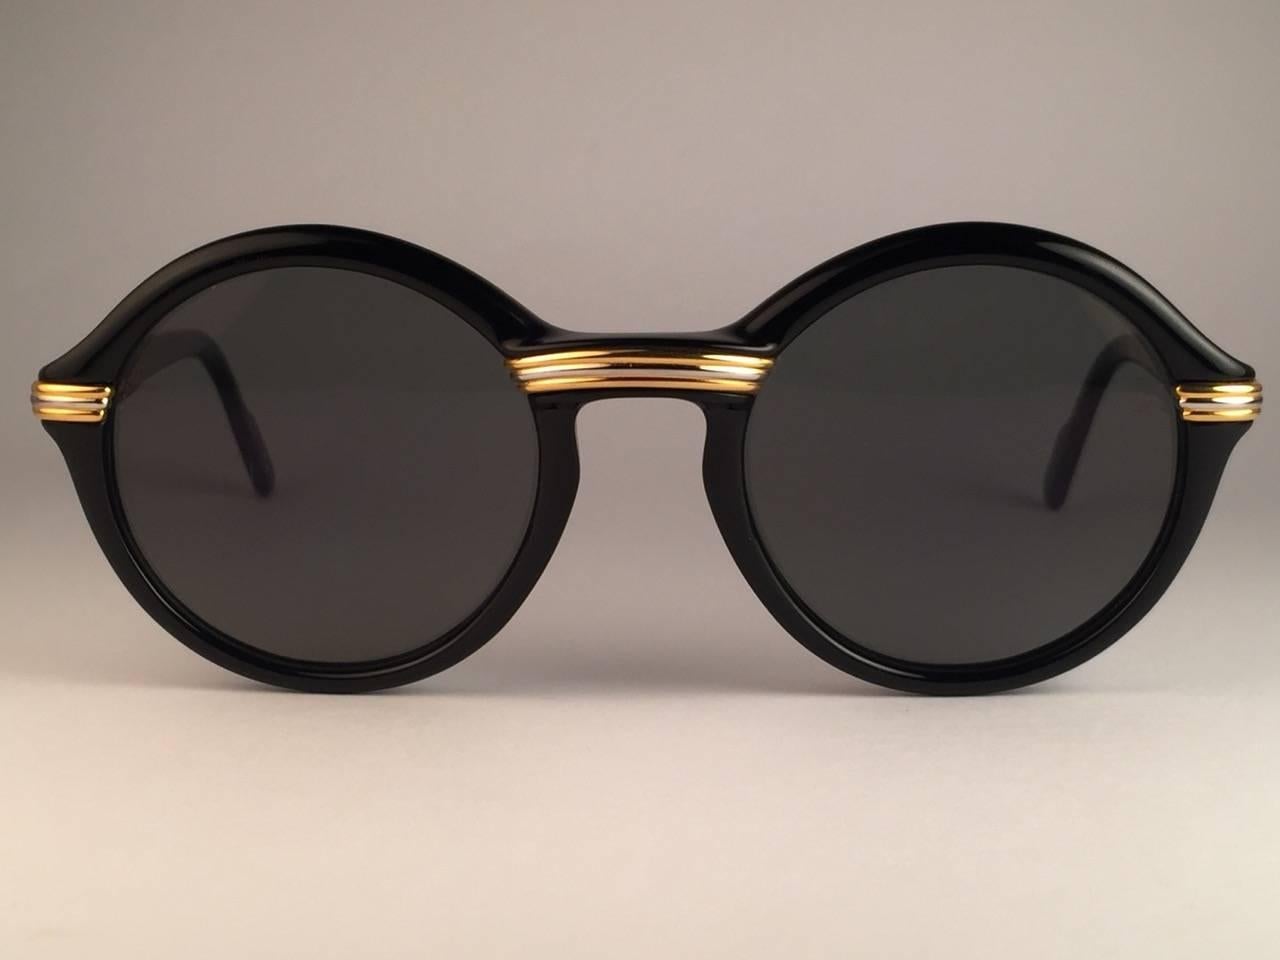 Vintage  1991 Original Cartier Cabriolet Art Deco Black & Gold Sunglasses with gold mirror ( uv protection ) lenses. 
Frame has the famous real gold and white gold accents in the middle and on the sides.  All hallmarks. Cartier gold signs on the